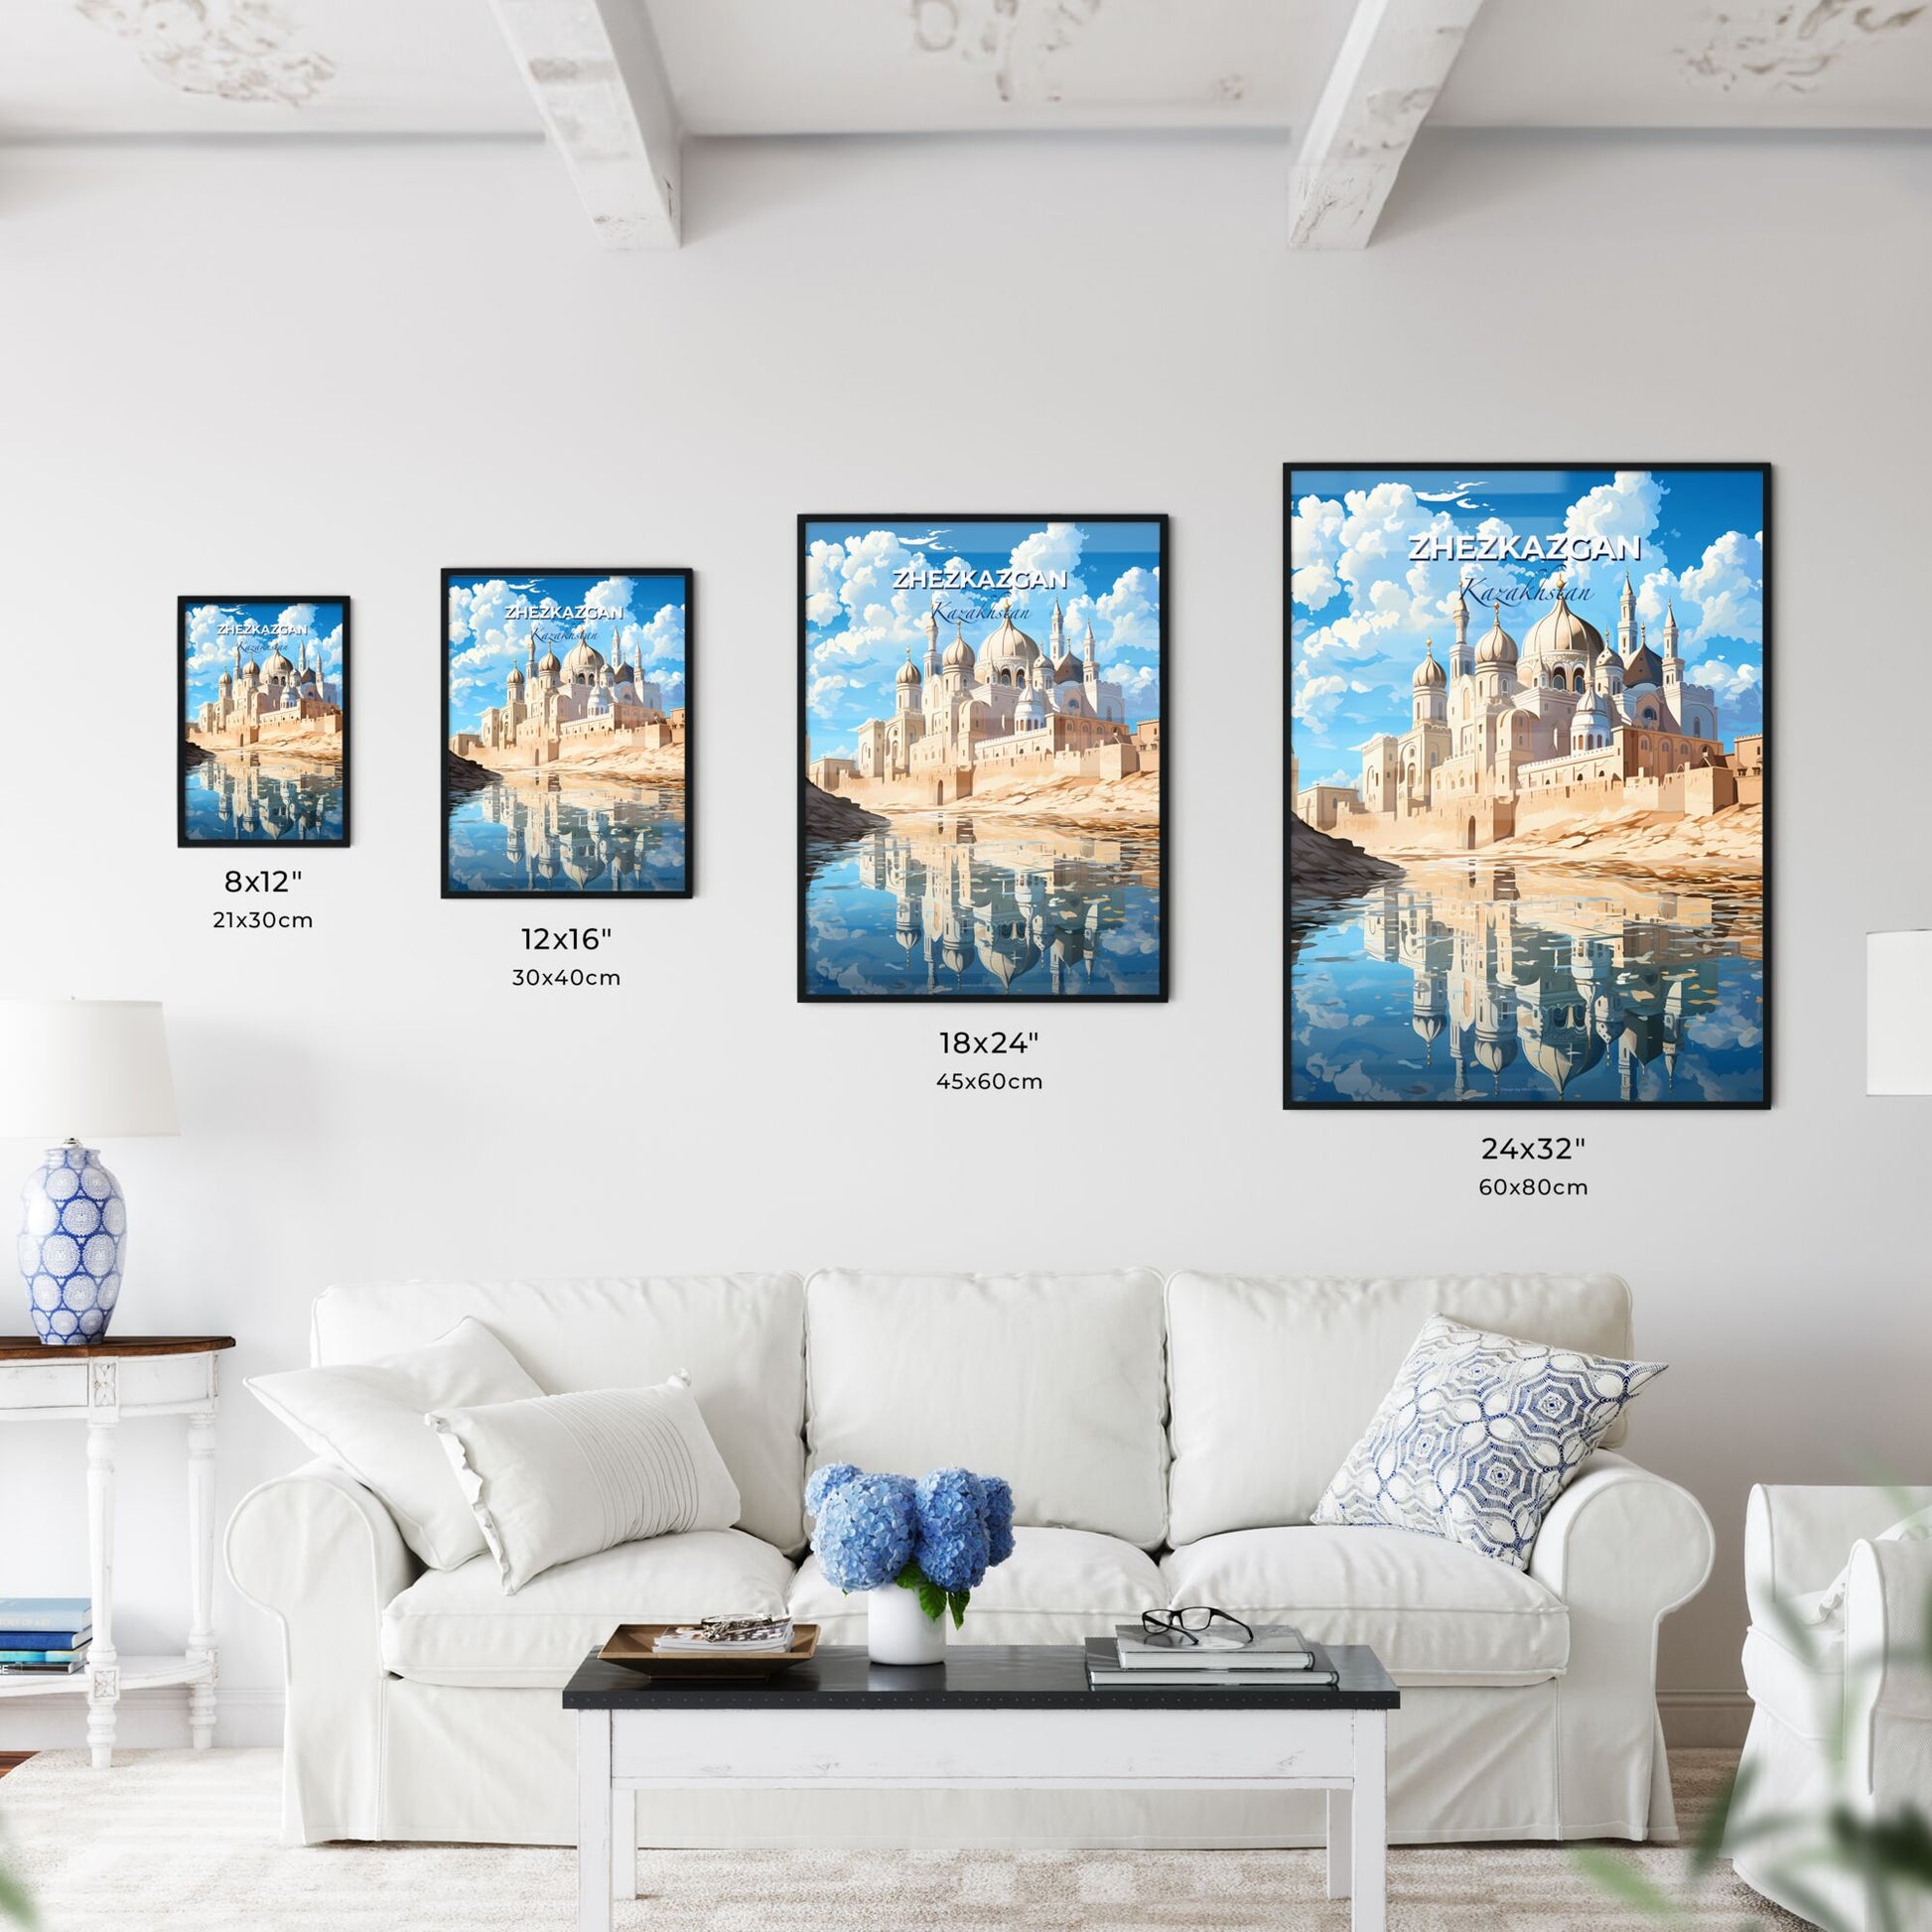 Zhezkazgan, Kazakhstan, A Poster of a castle with towers and towers and a body of water Default Title